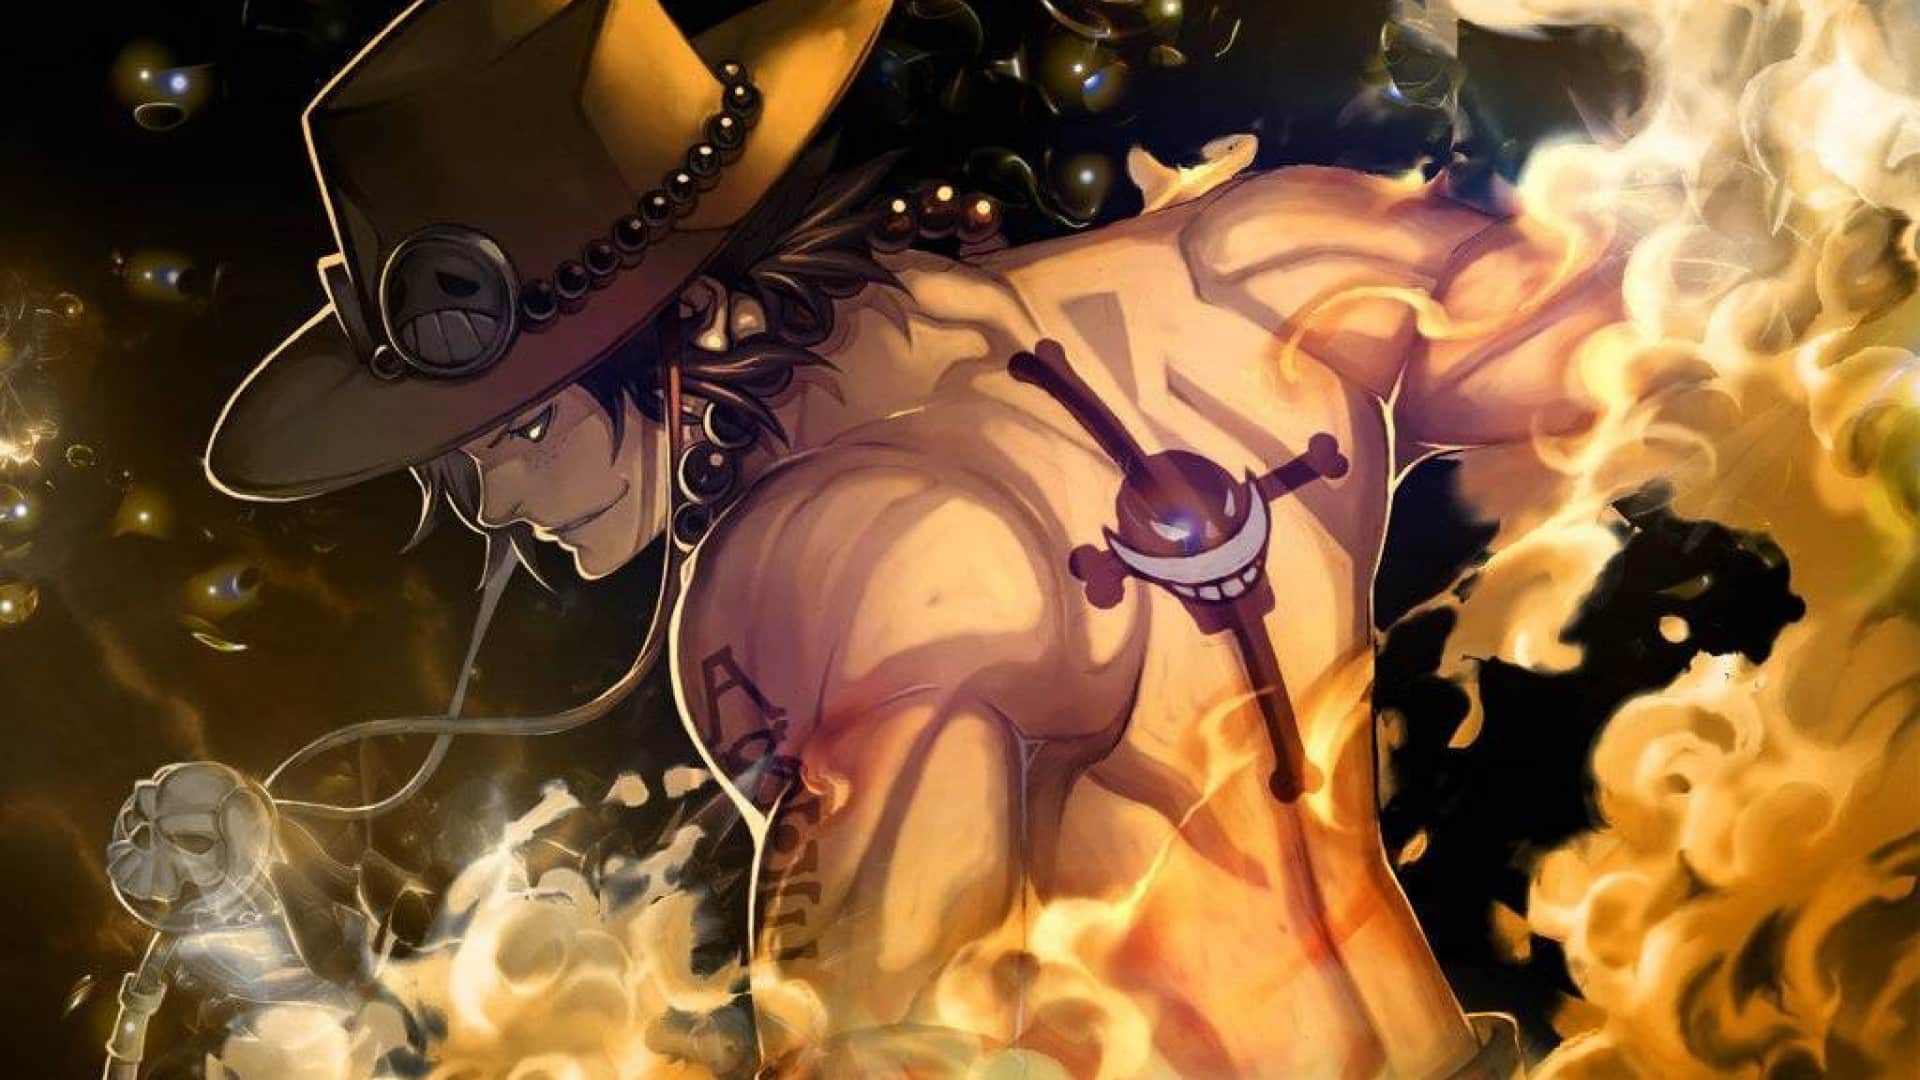 One Piece Portgas D Ace On Fire 4K 8K HD Anime Wallpapers, HD Wallpapers